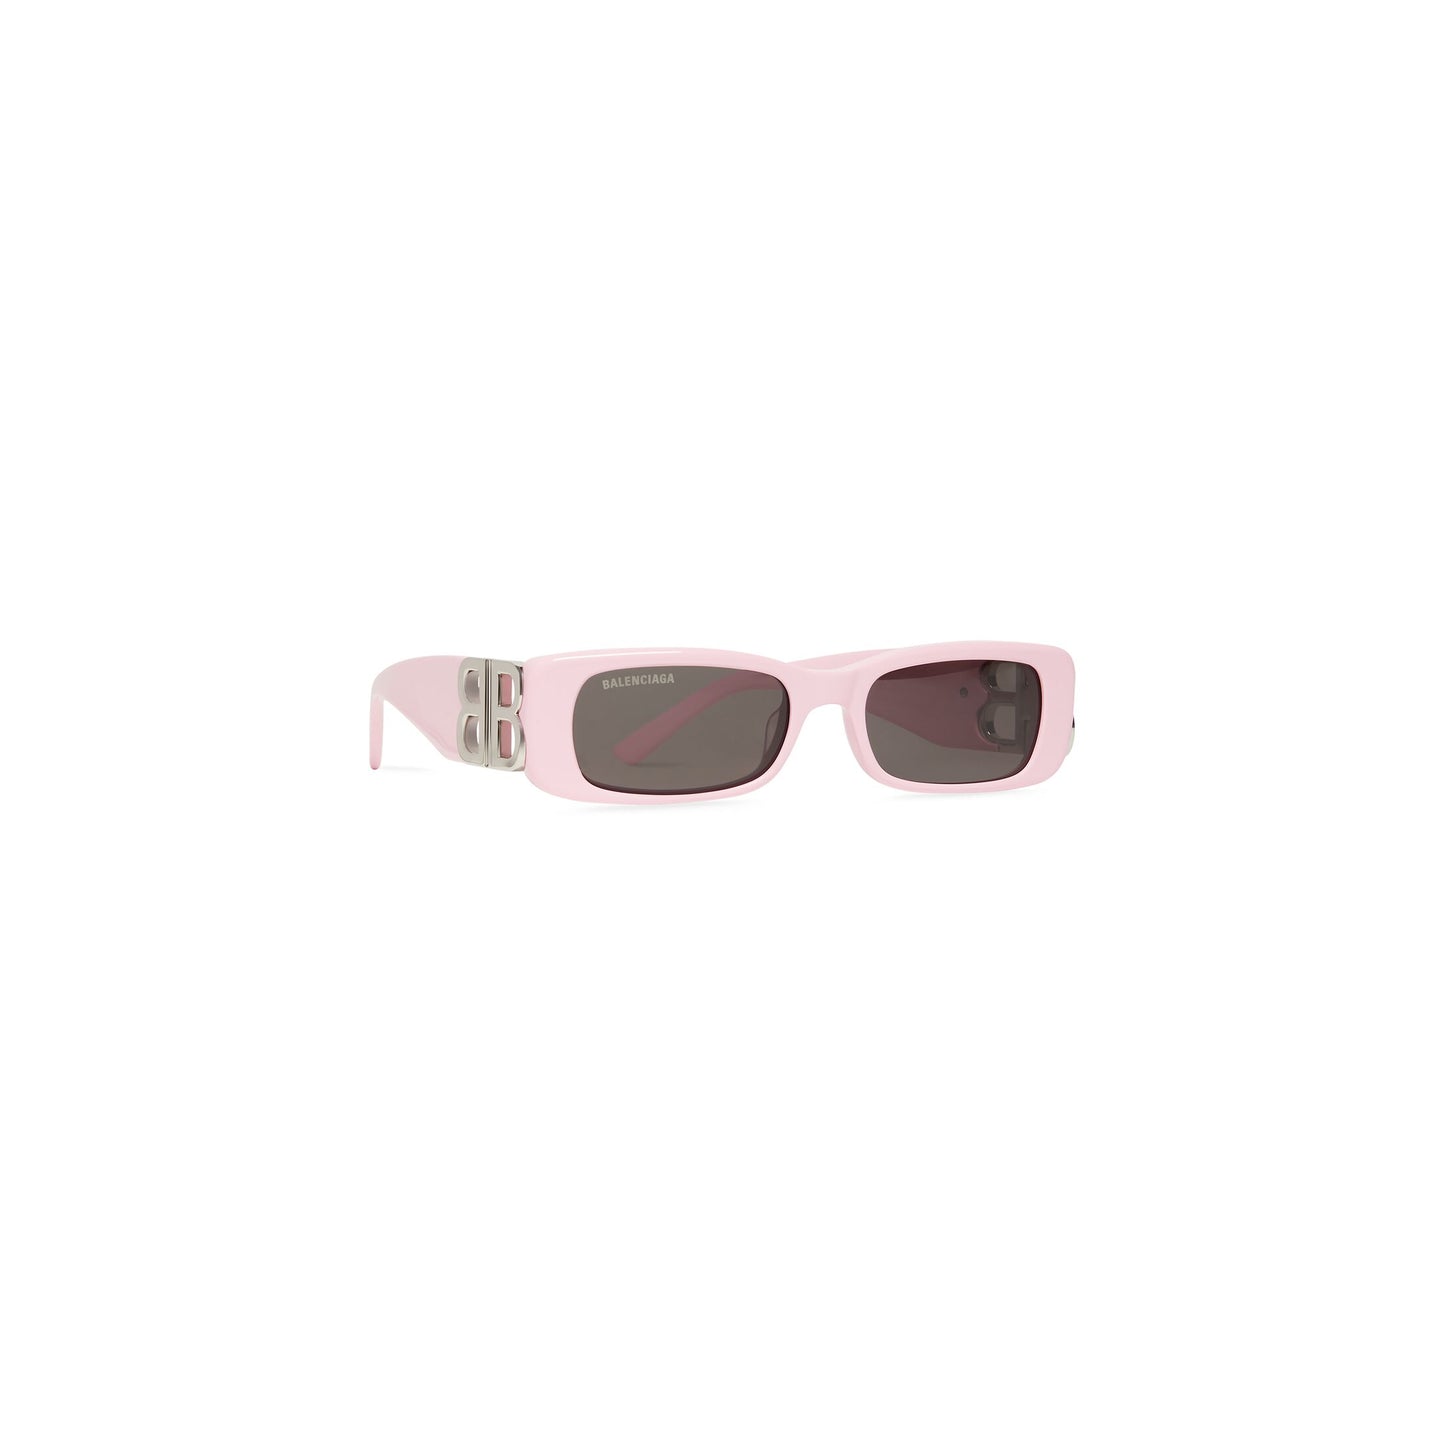 Dynasty Rectangle Sunglasses - Pink Acetate